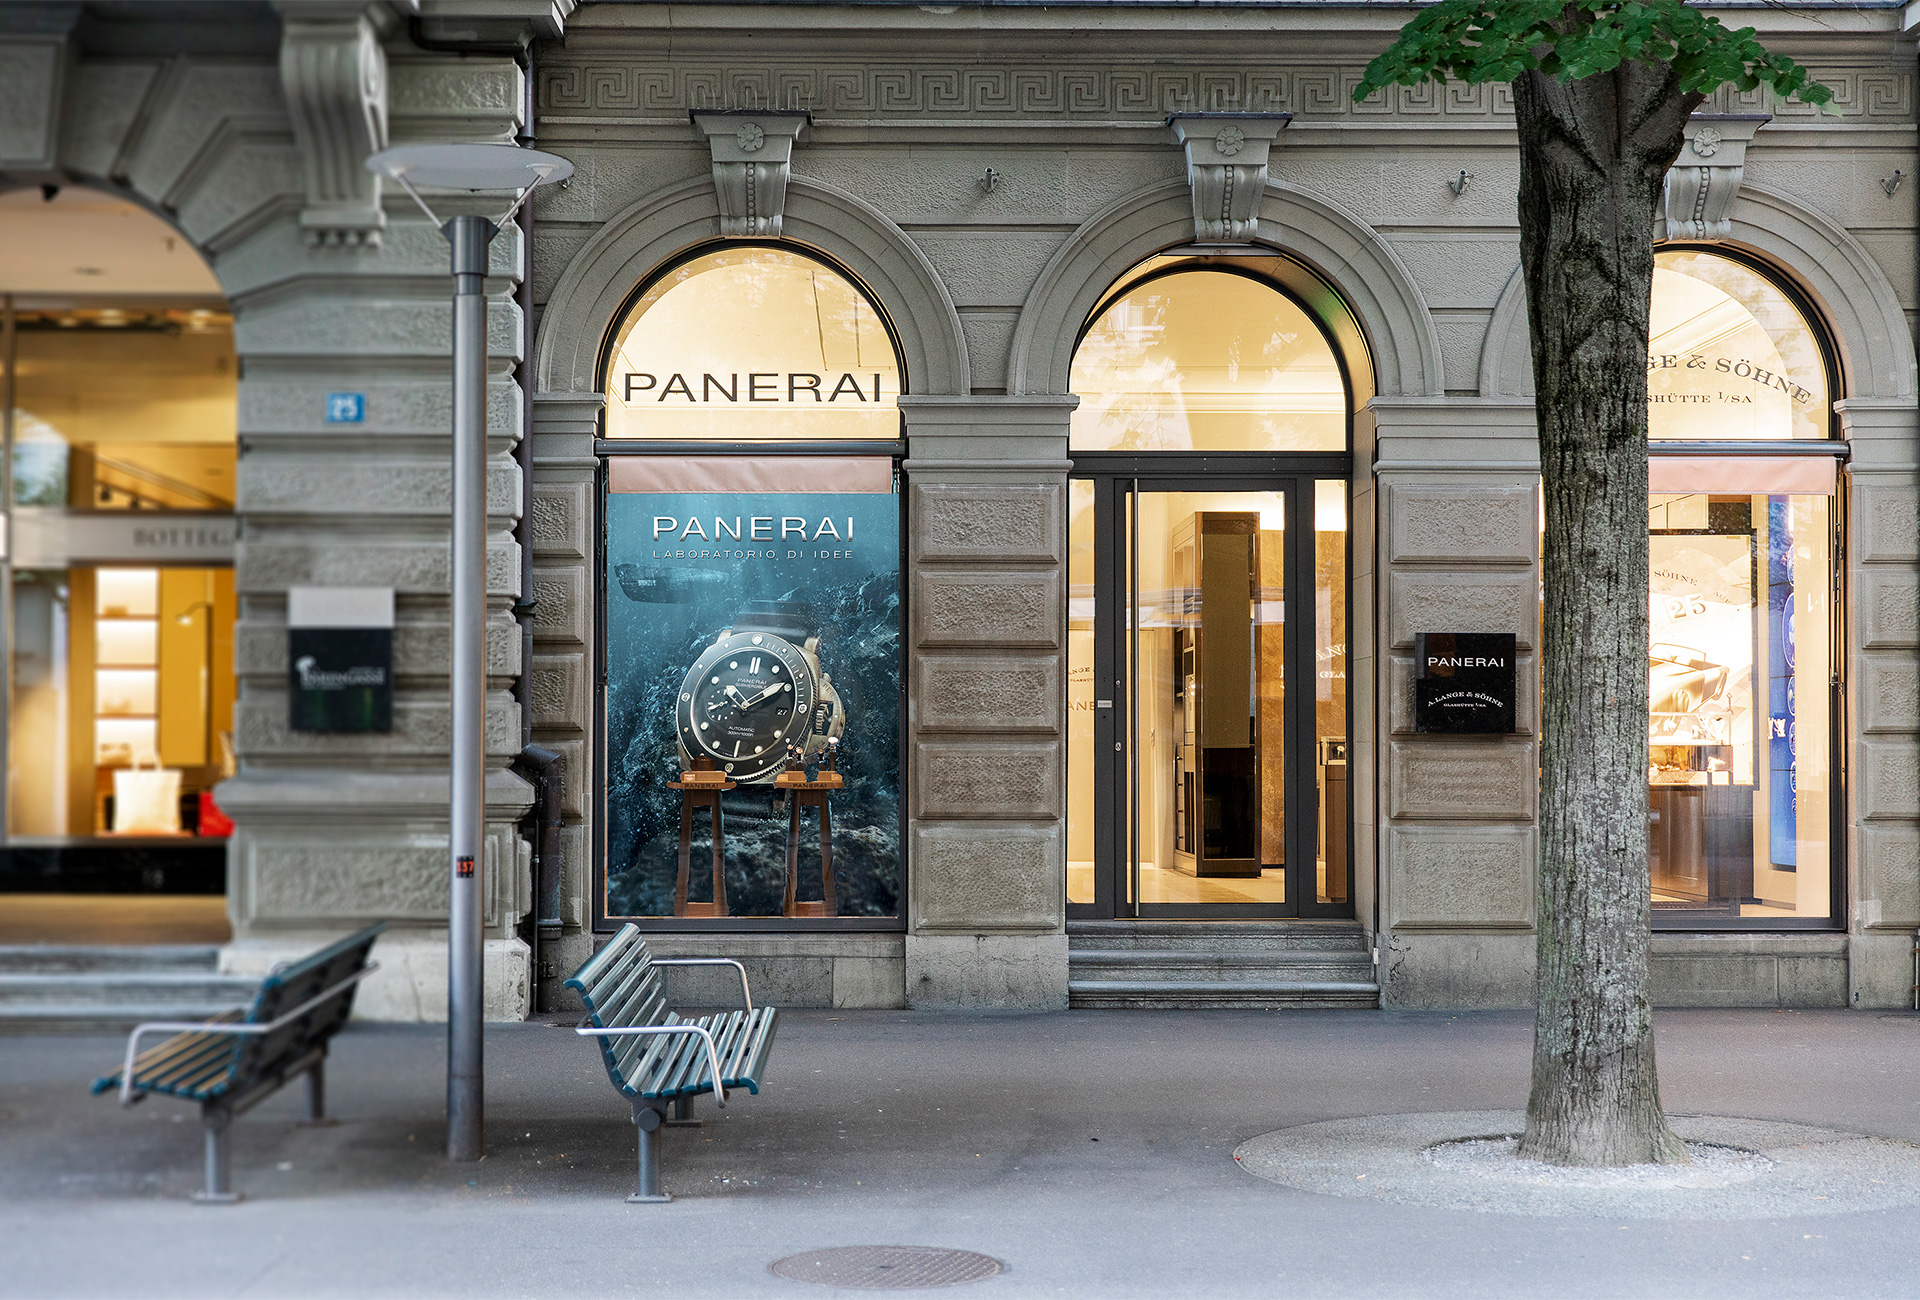 Panerai moves into Zurich – FHH Journal